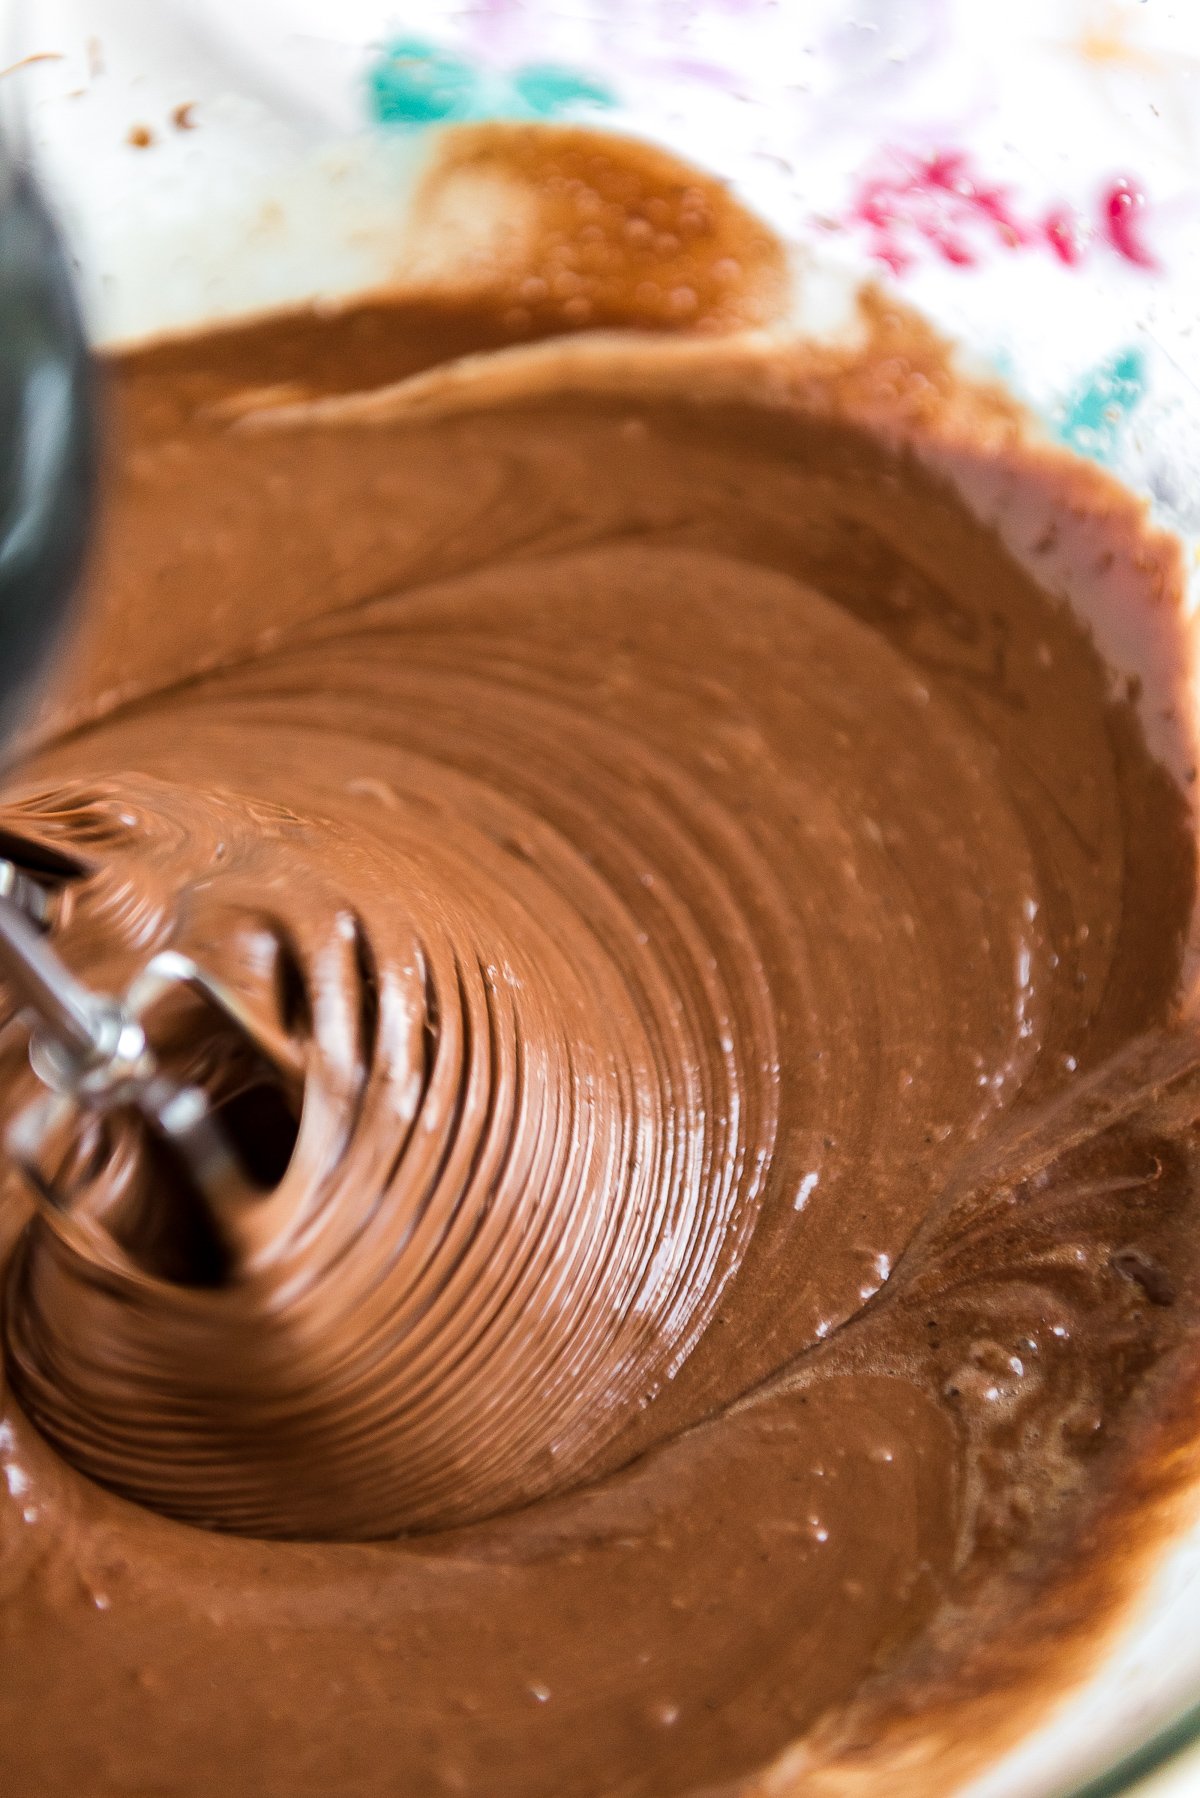 Brownie batter being mixed with a hand mixer.